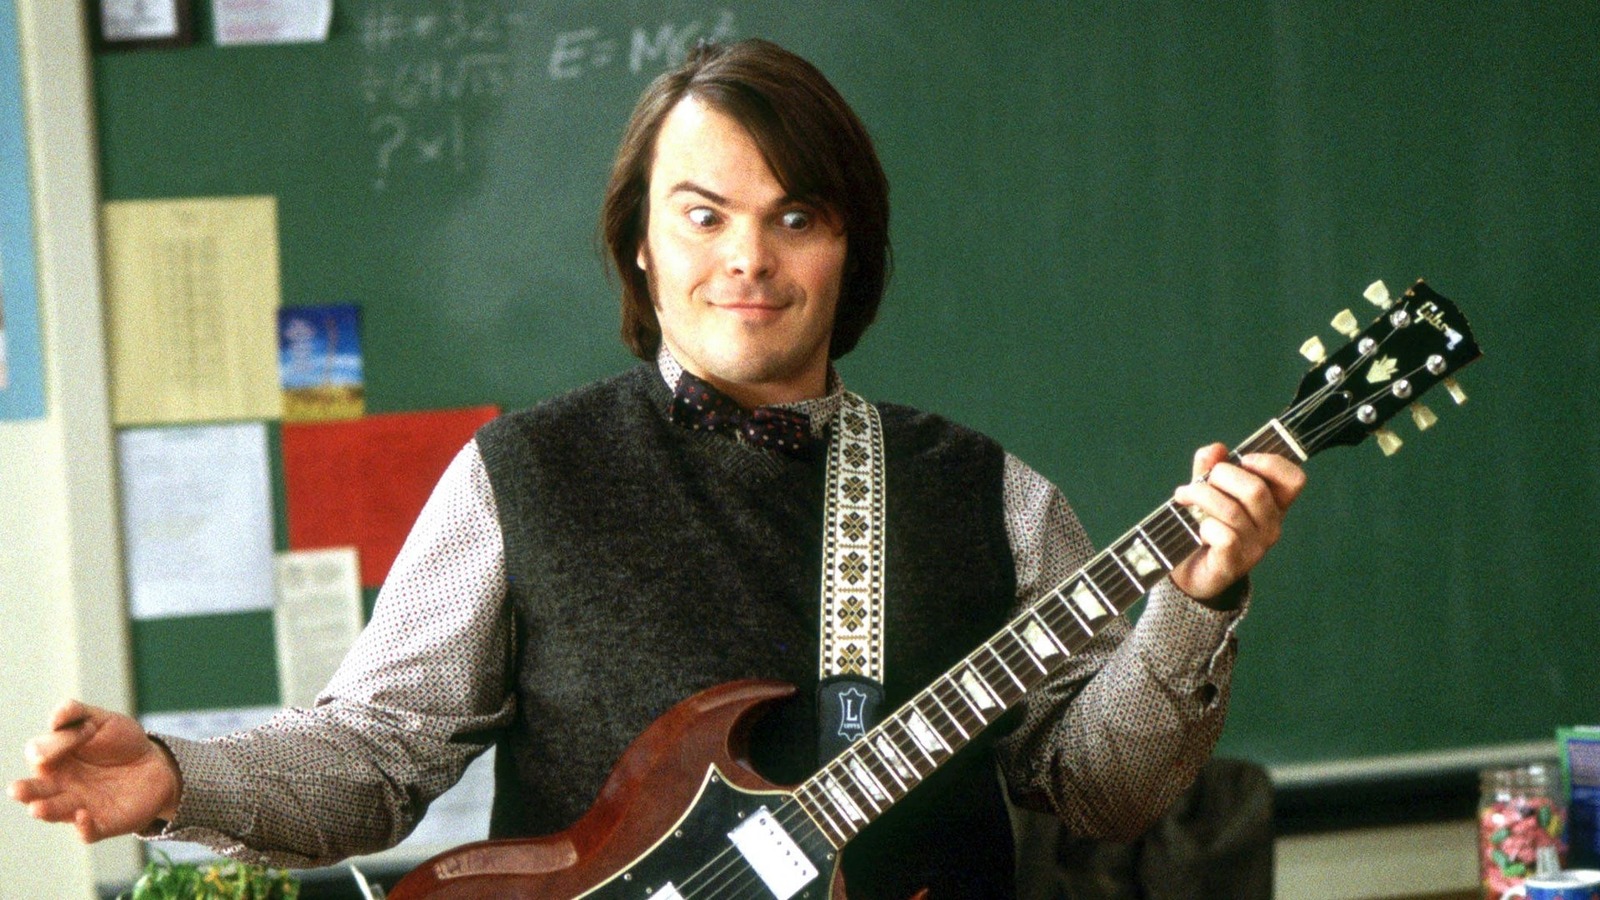 How to watch and stream Jack Black movies and TV shows